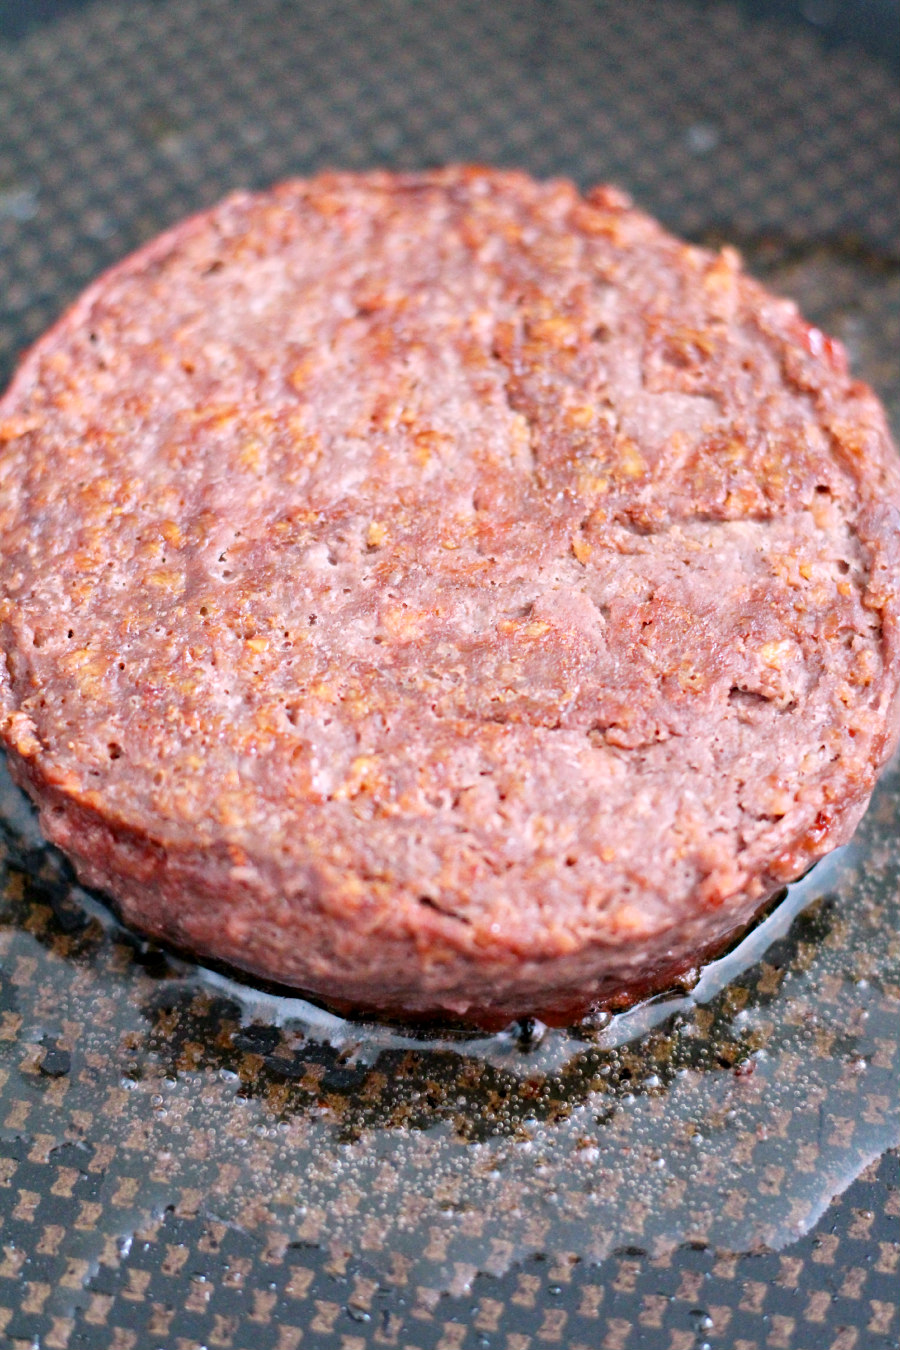 Plant based burger patty being cooked in a skillet.